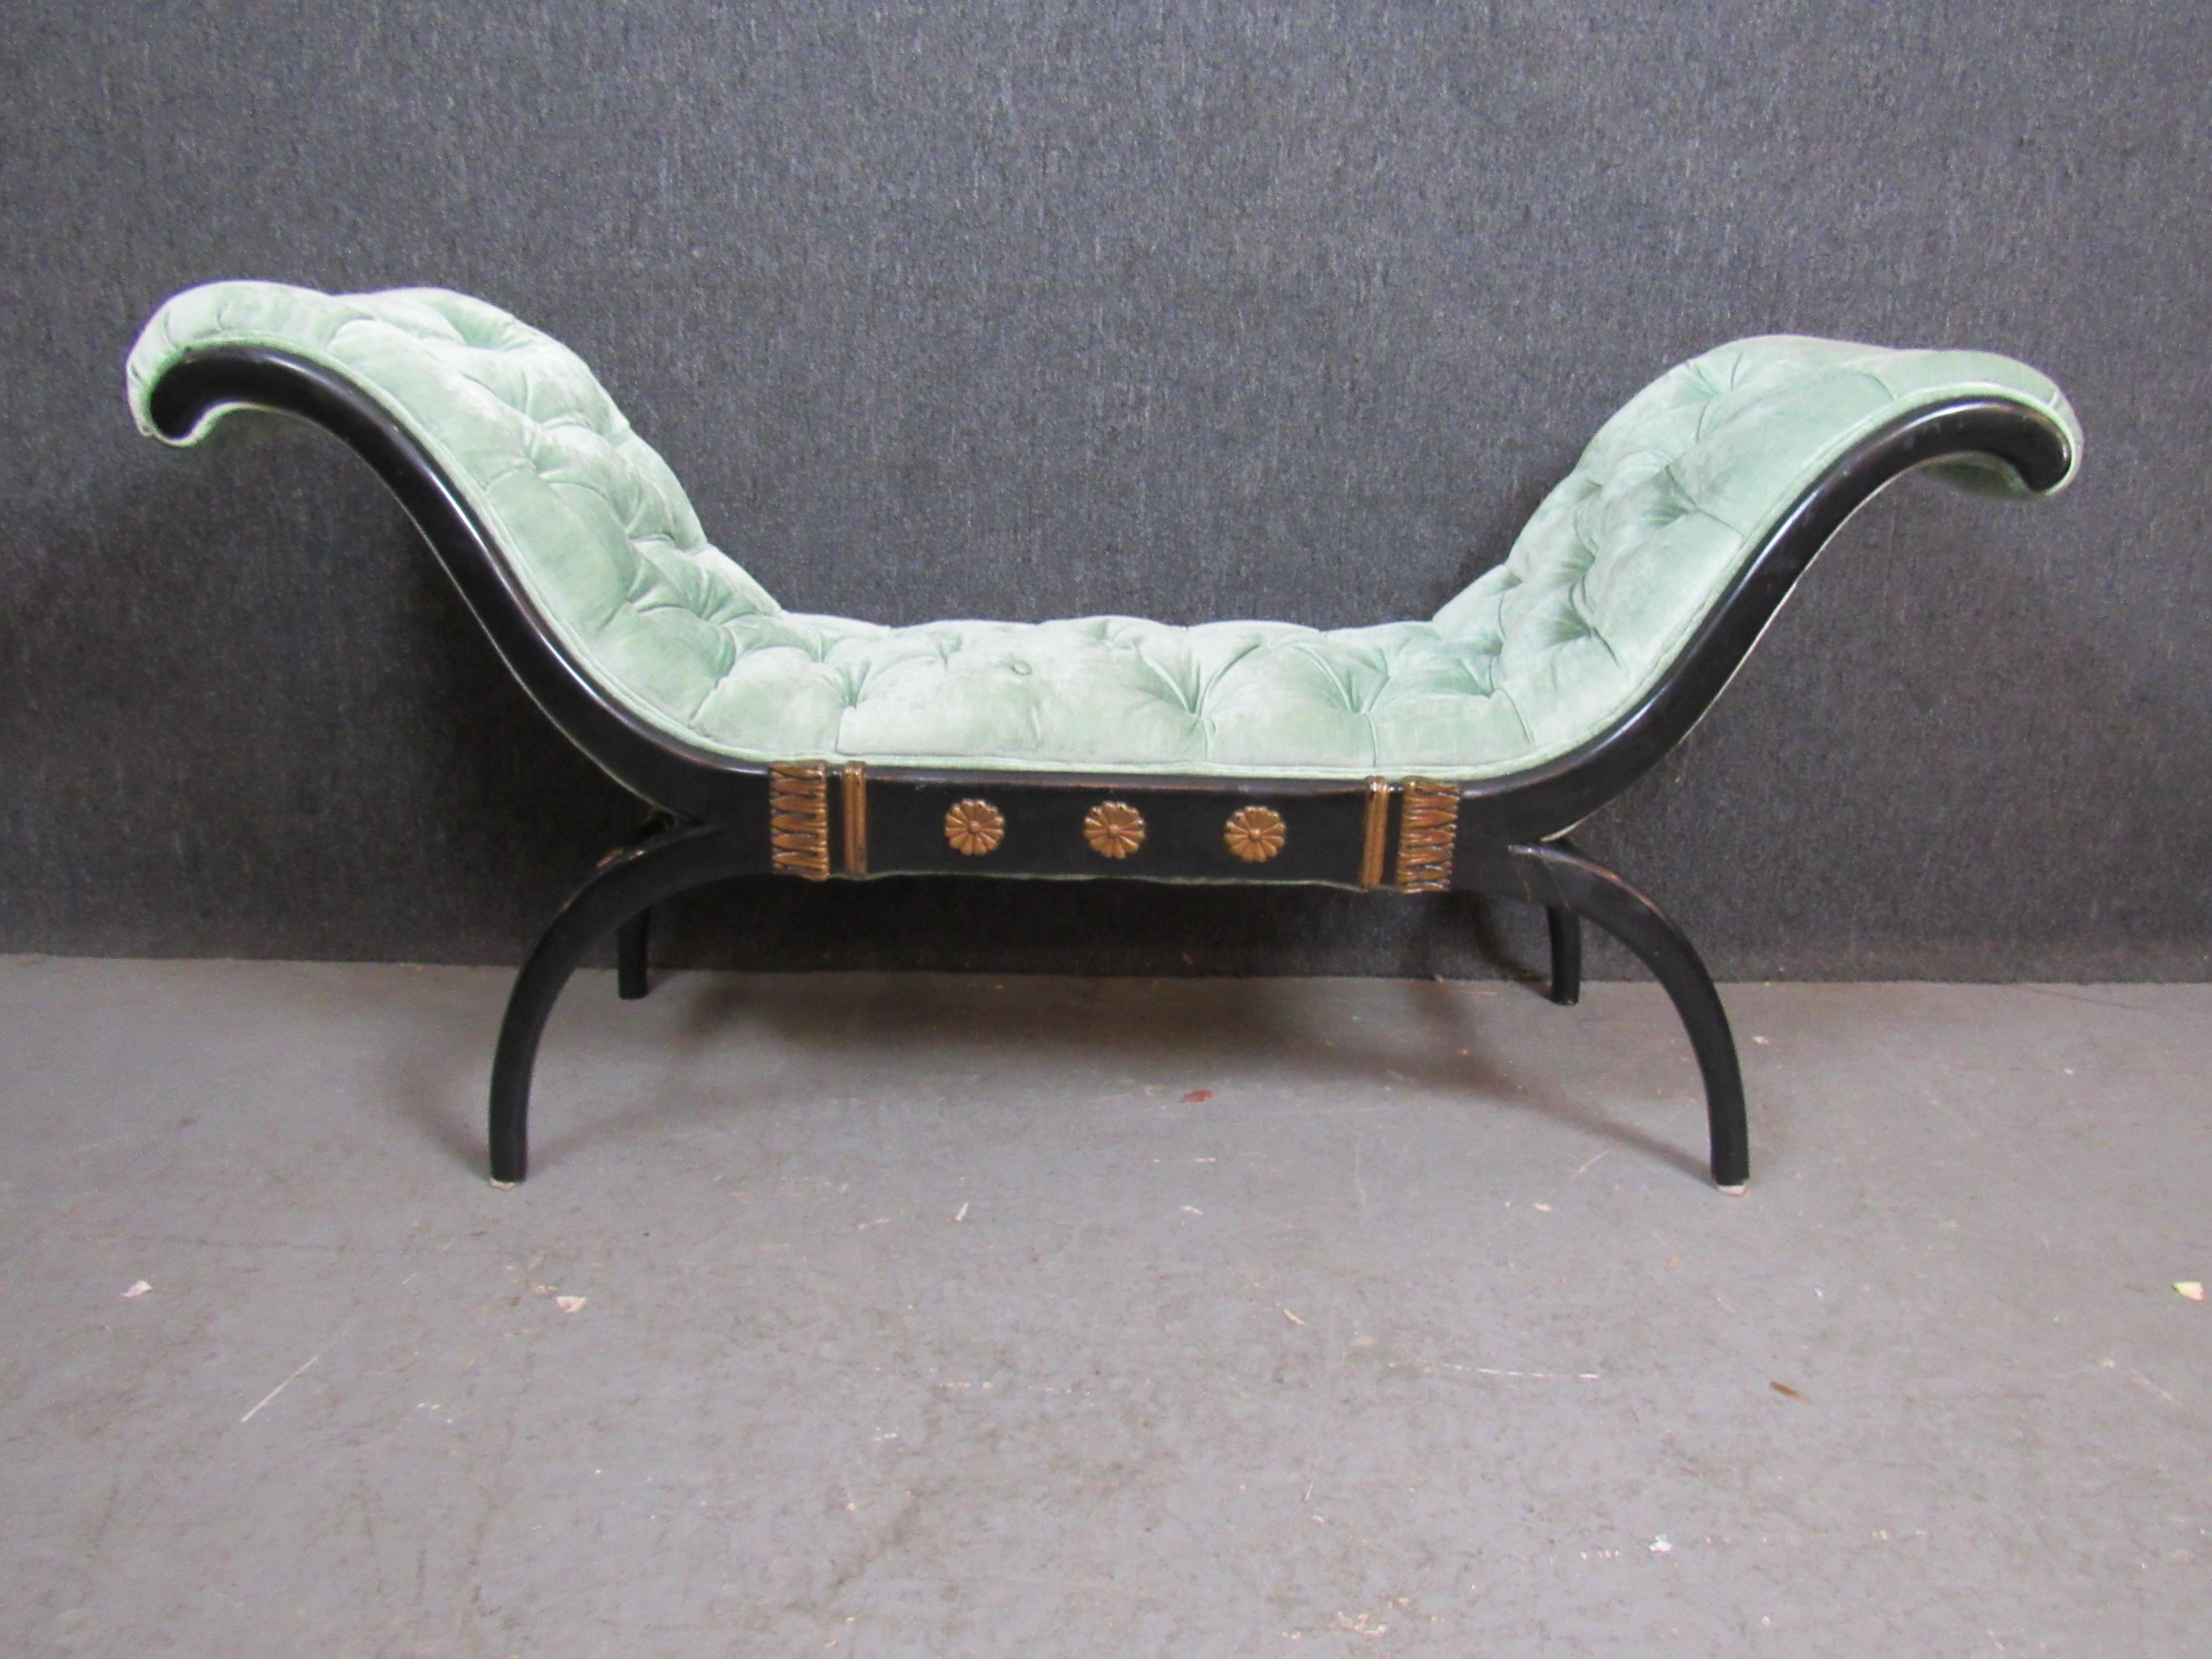 Antique Tufted Velvet French Regency Window Bench In Good Condition For Sale In Brooklyn, NY